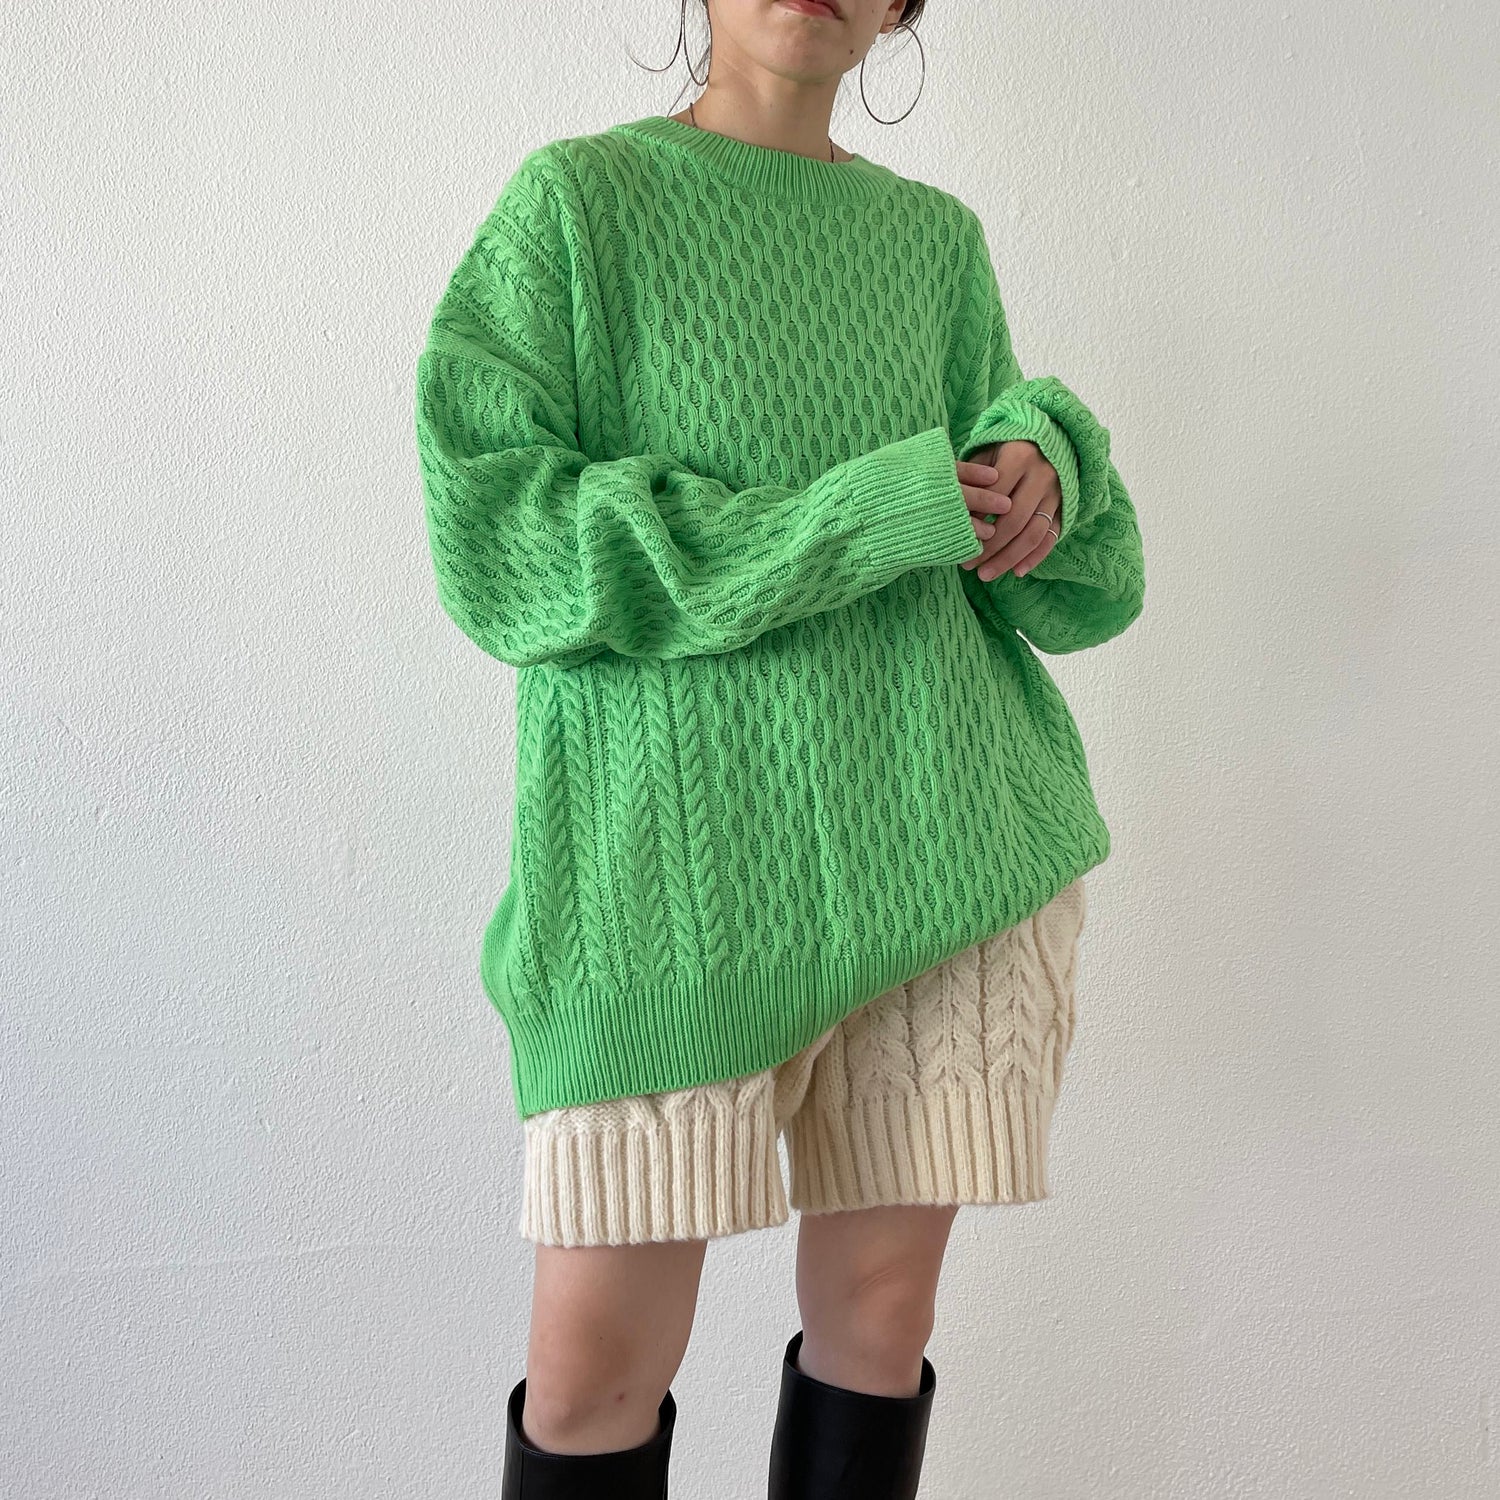 turtle neck cable knit set up / ivory